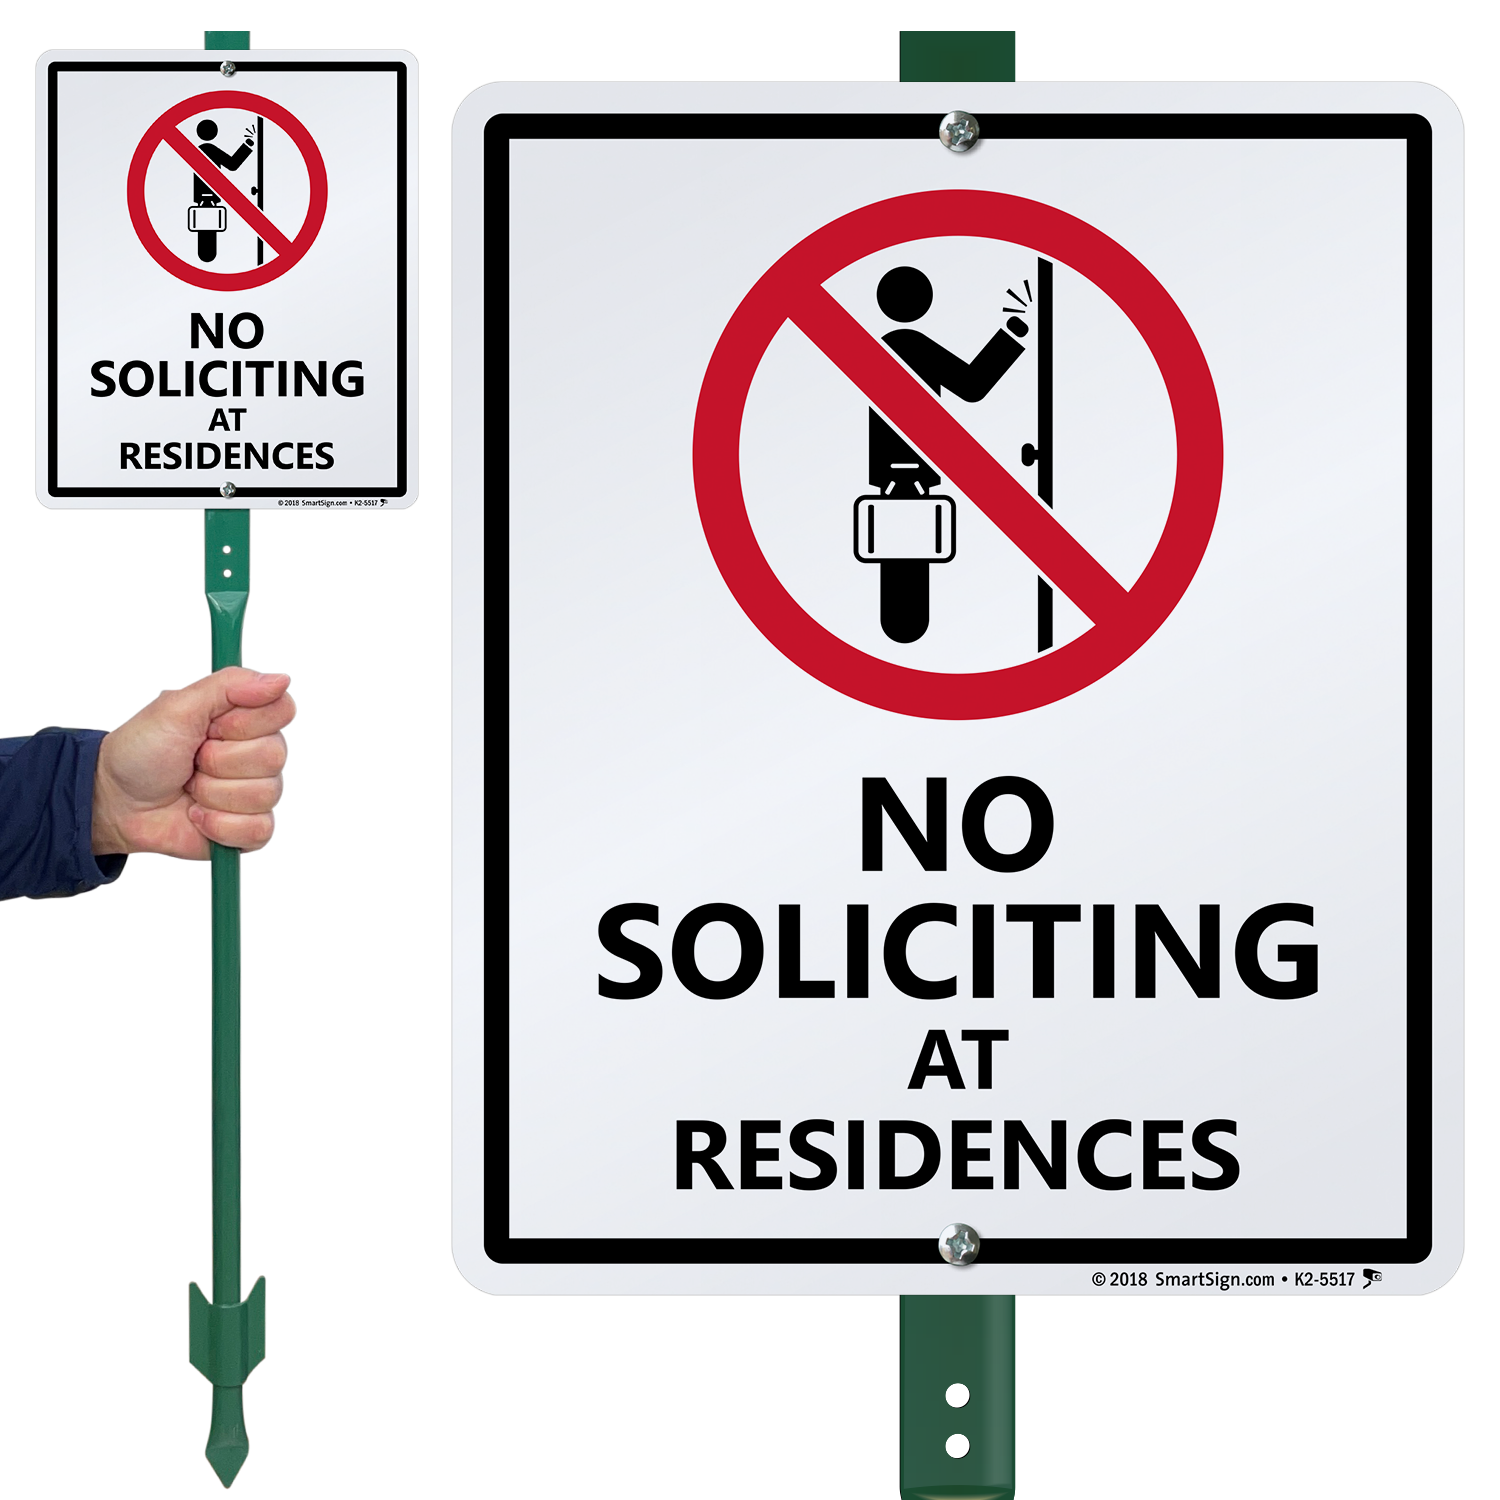 No Soliciting At Residences LawnBoss Sign, SKU: K2-5517